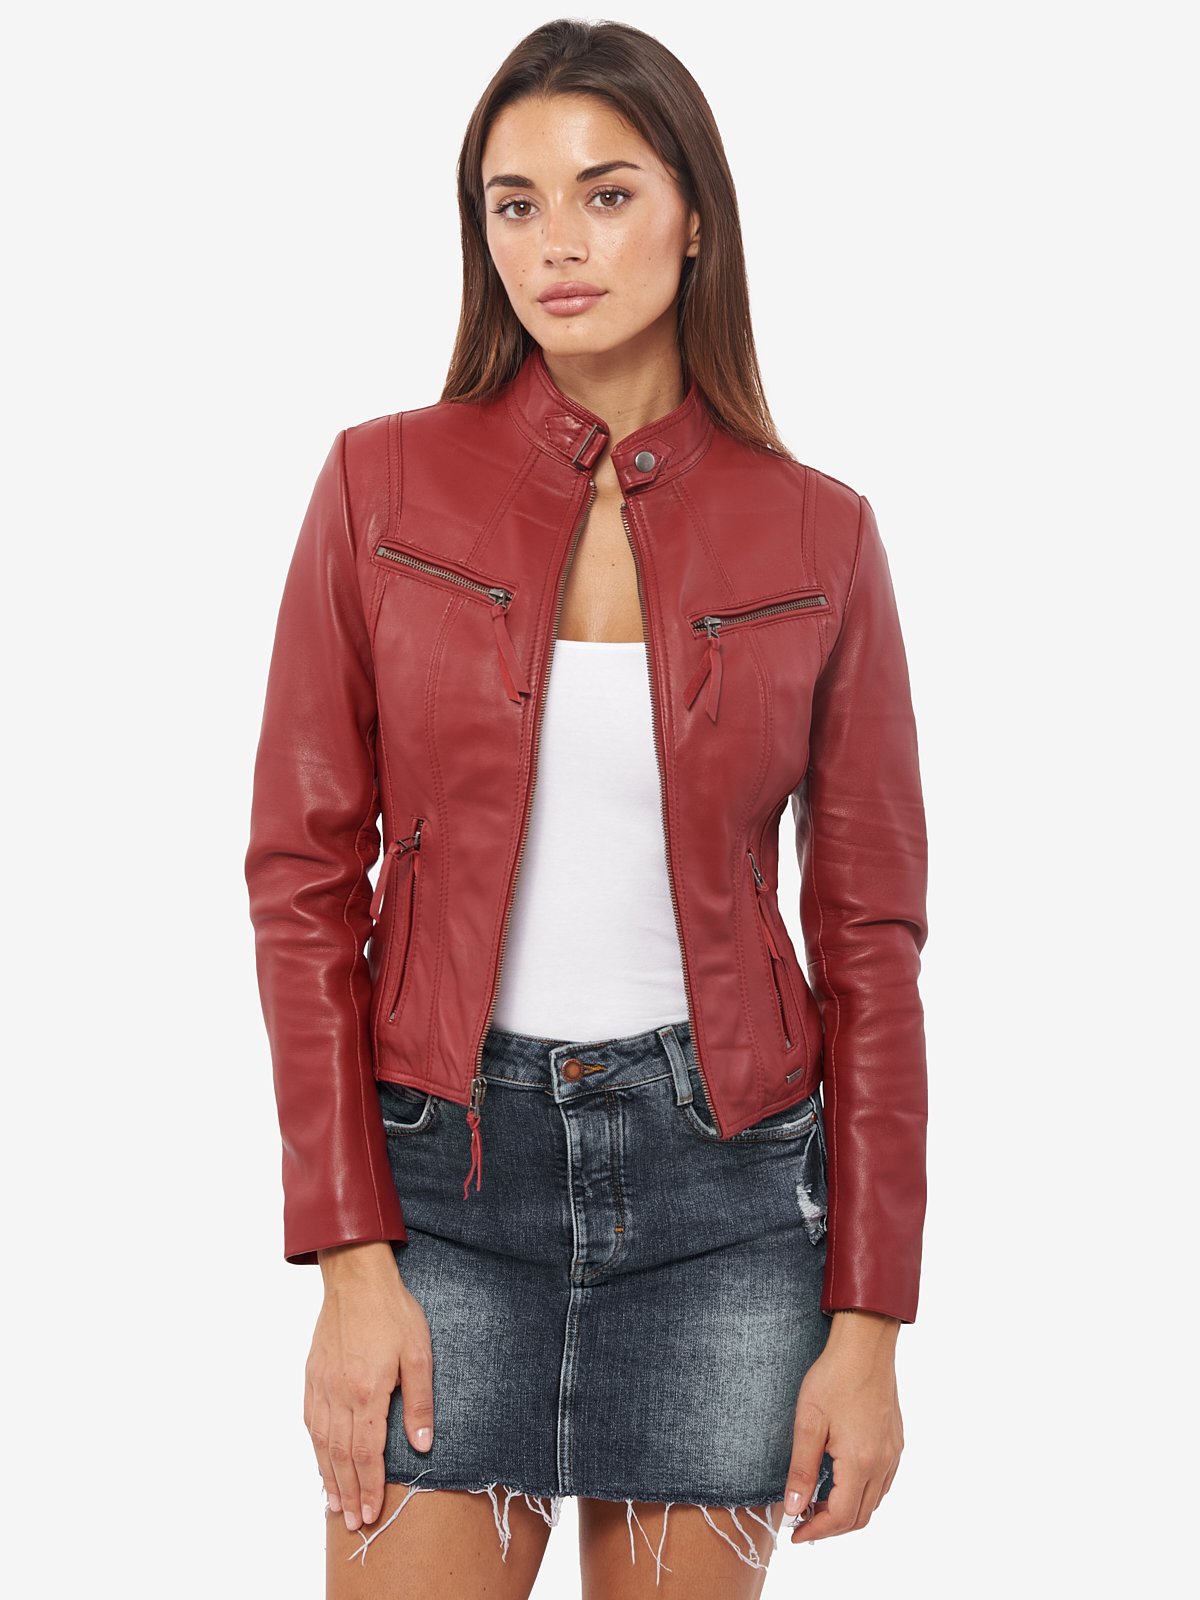 Women Body Fit Bomber KARIOX F-L 41 Leather Jacket